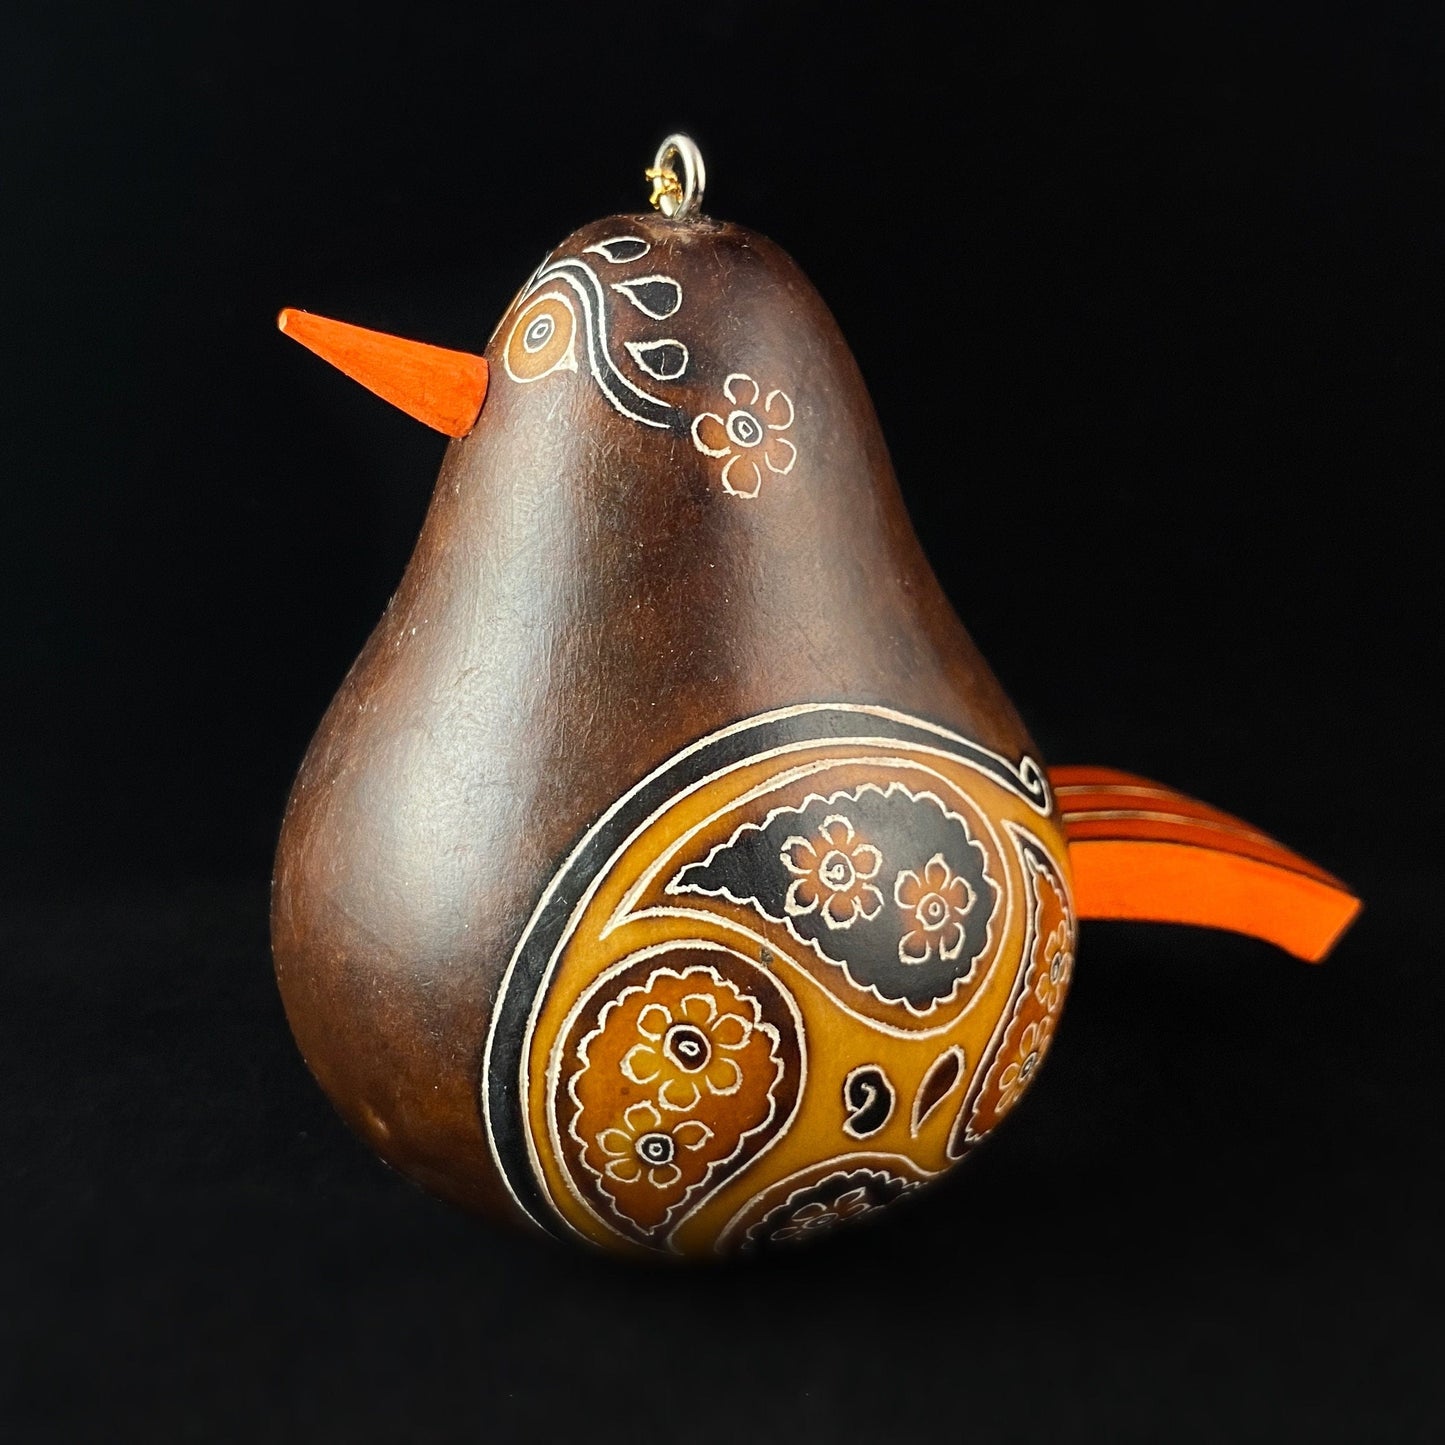 Decorative Brown Bird Ornament/Maraca - Hand-Carved and Hand Painted Peruvian Gourd